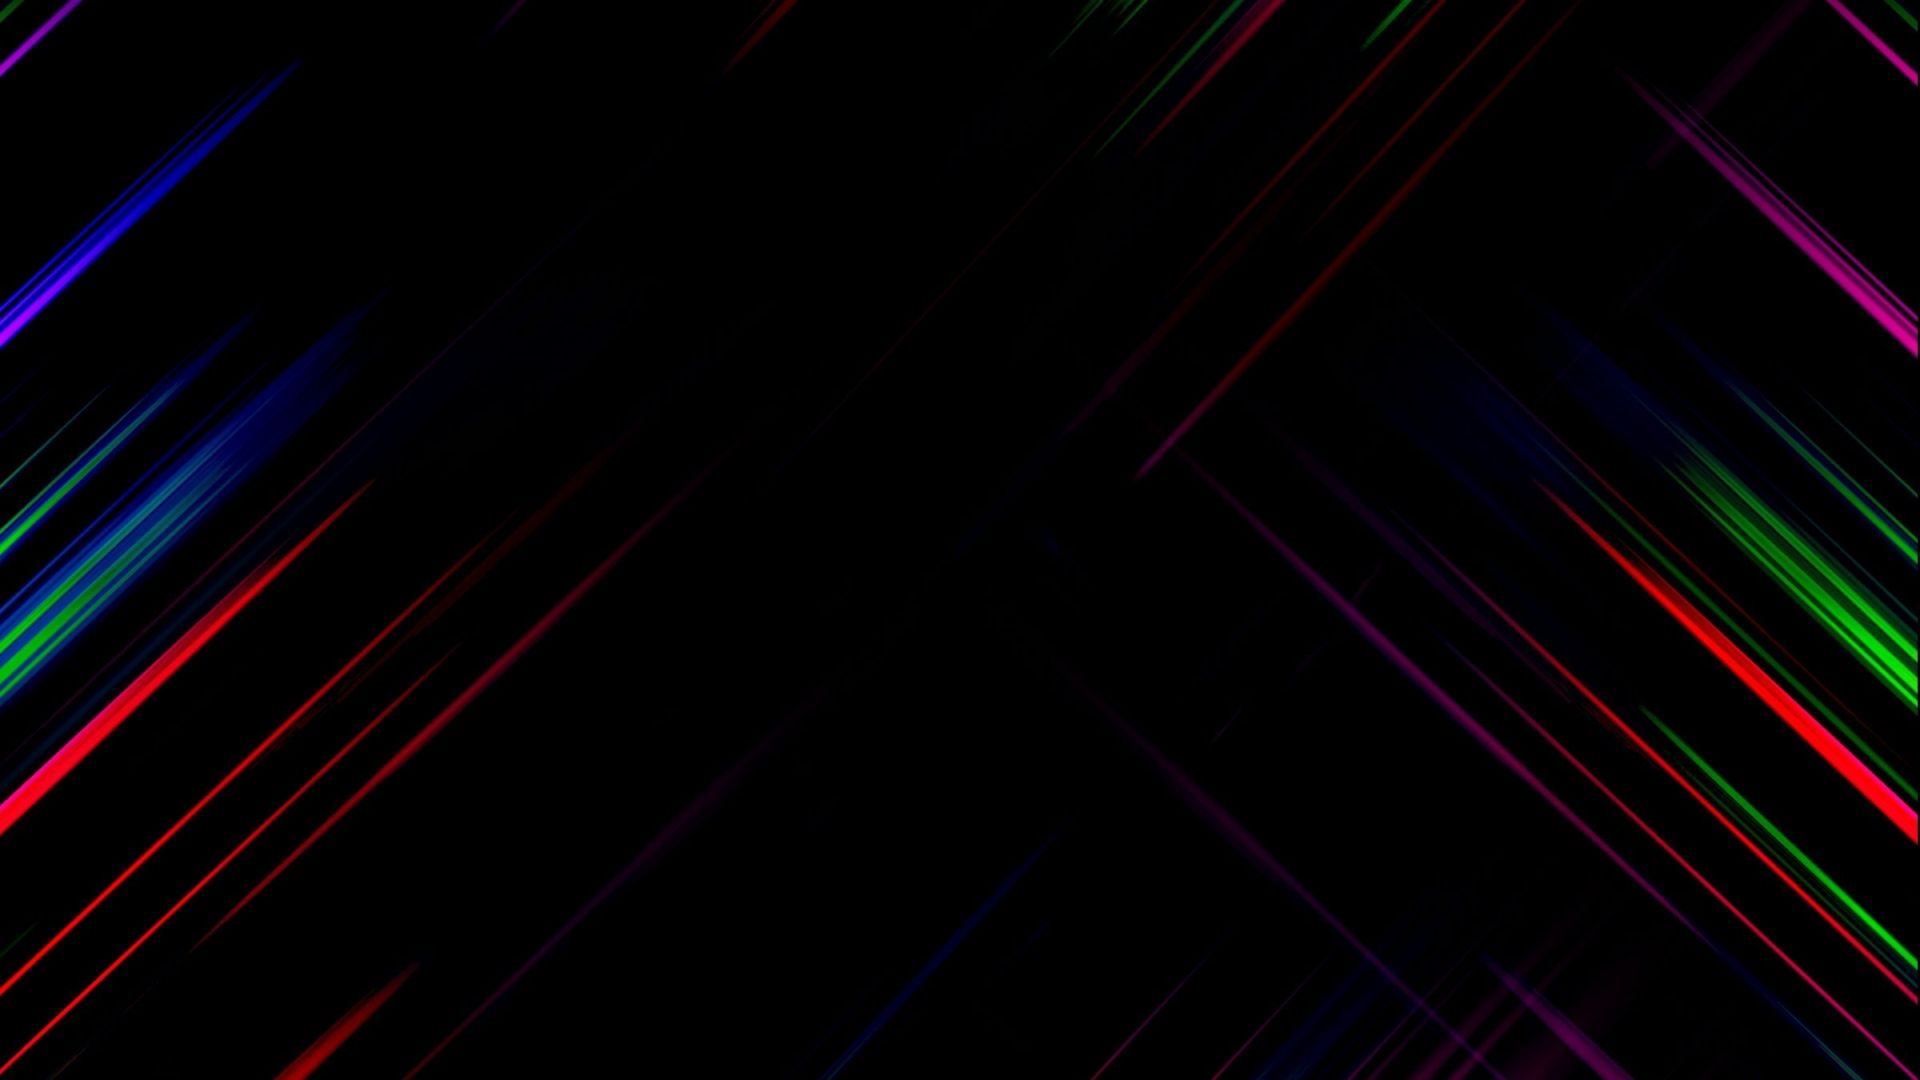 Free download 30 wallpaper perfect for AMOLED screens 2400x1920